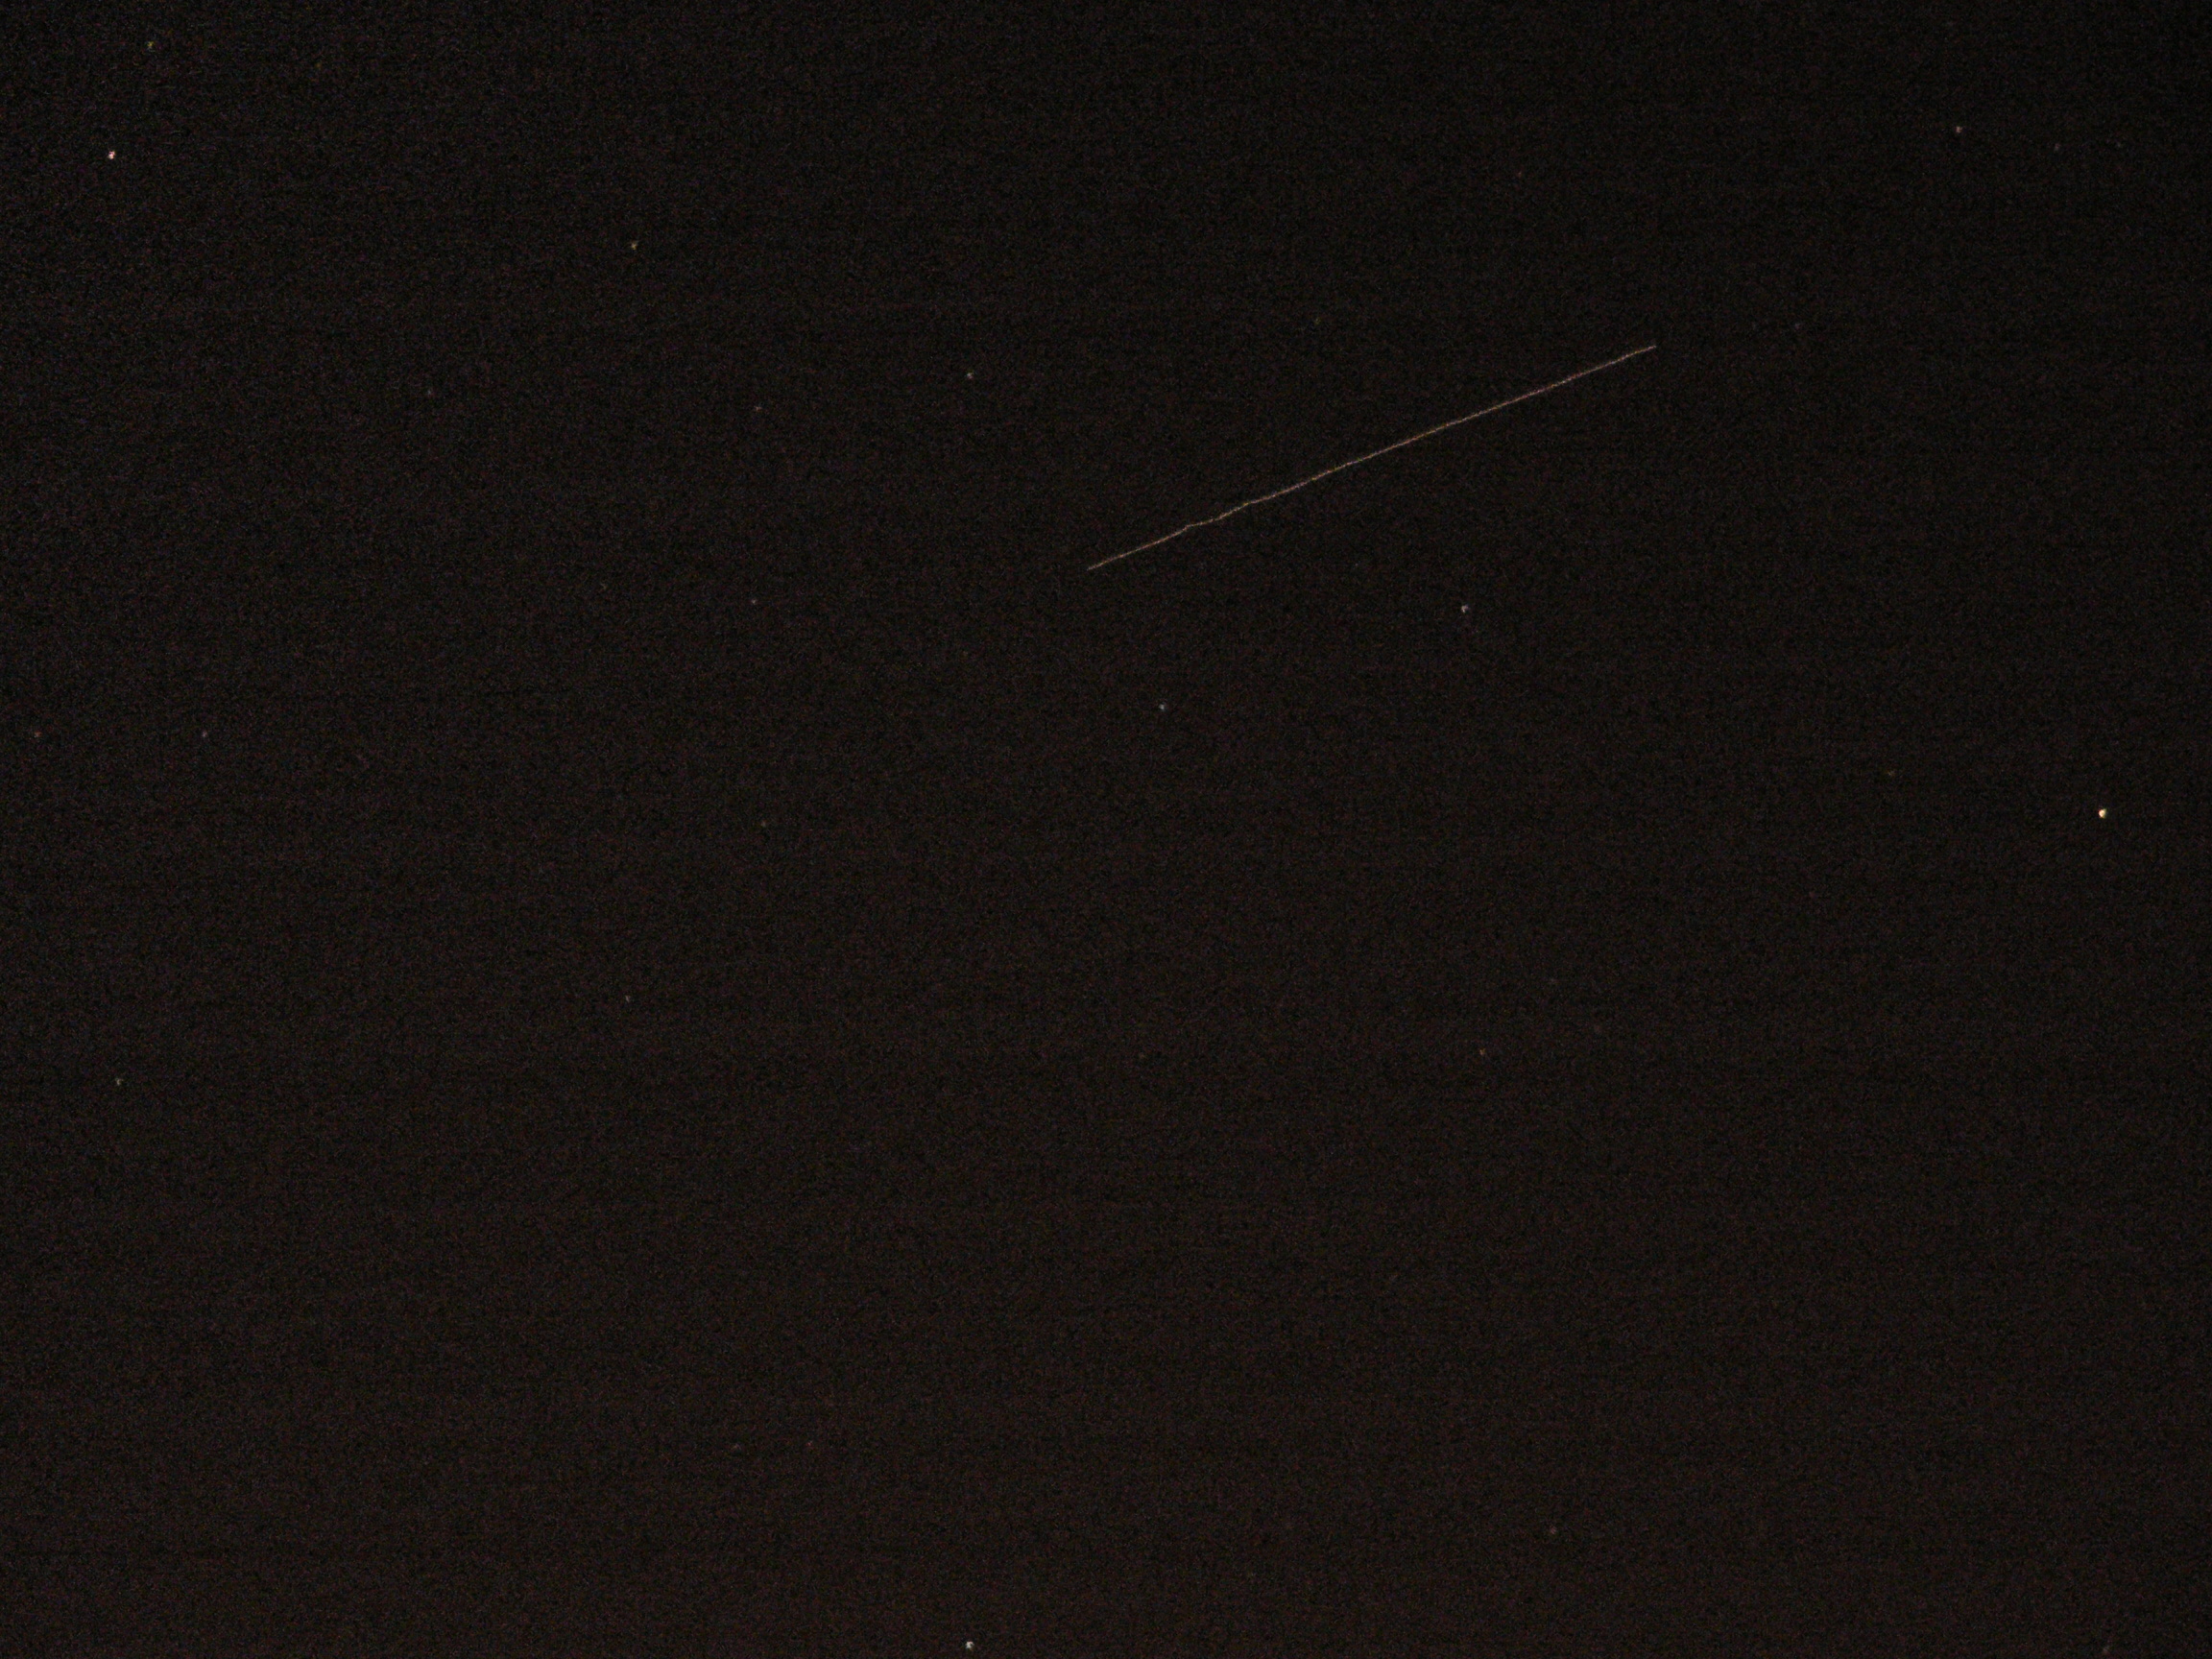 ISS 9.10.2005 6:05